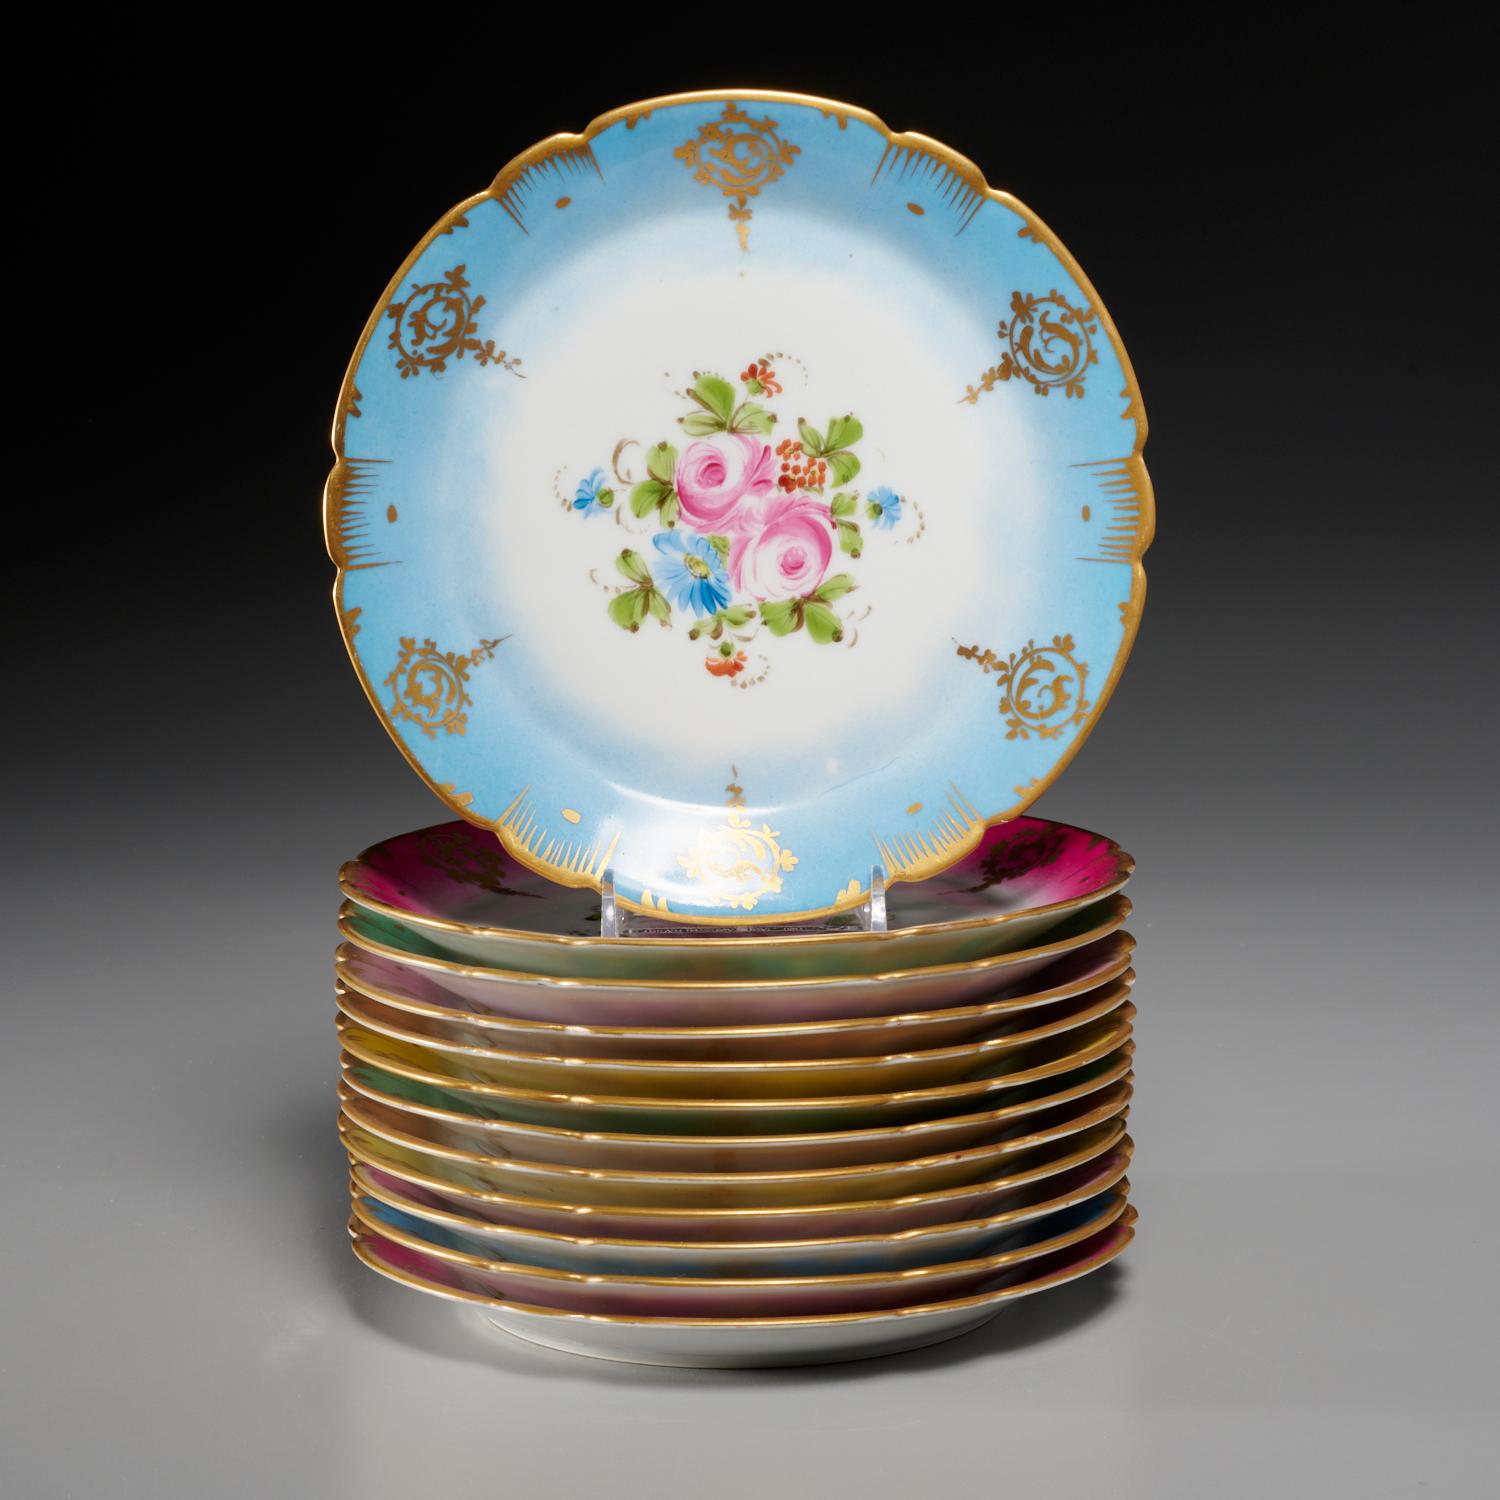 Sèvres Style Gilt and Painted Porcelain Dessert Service for 12 In Good Condition For Sale In Morristown, NJ